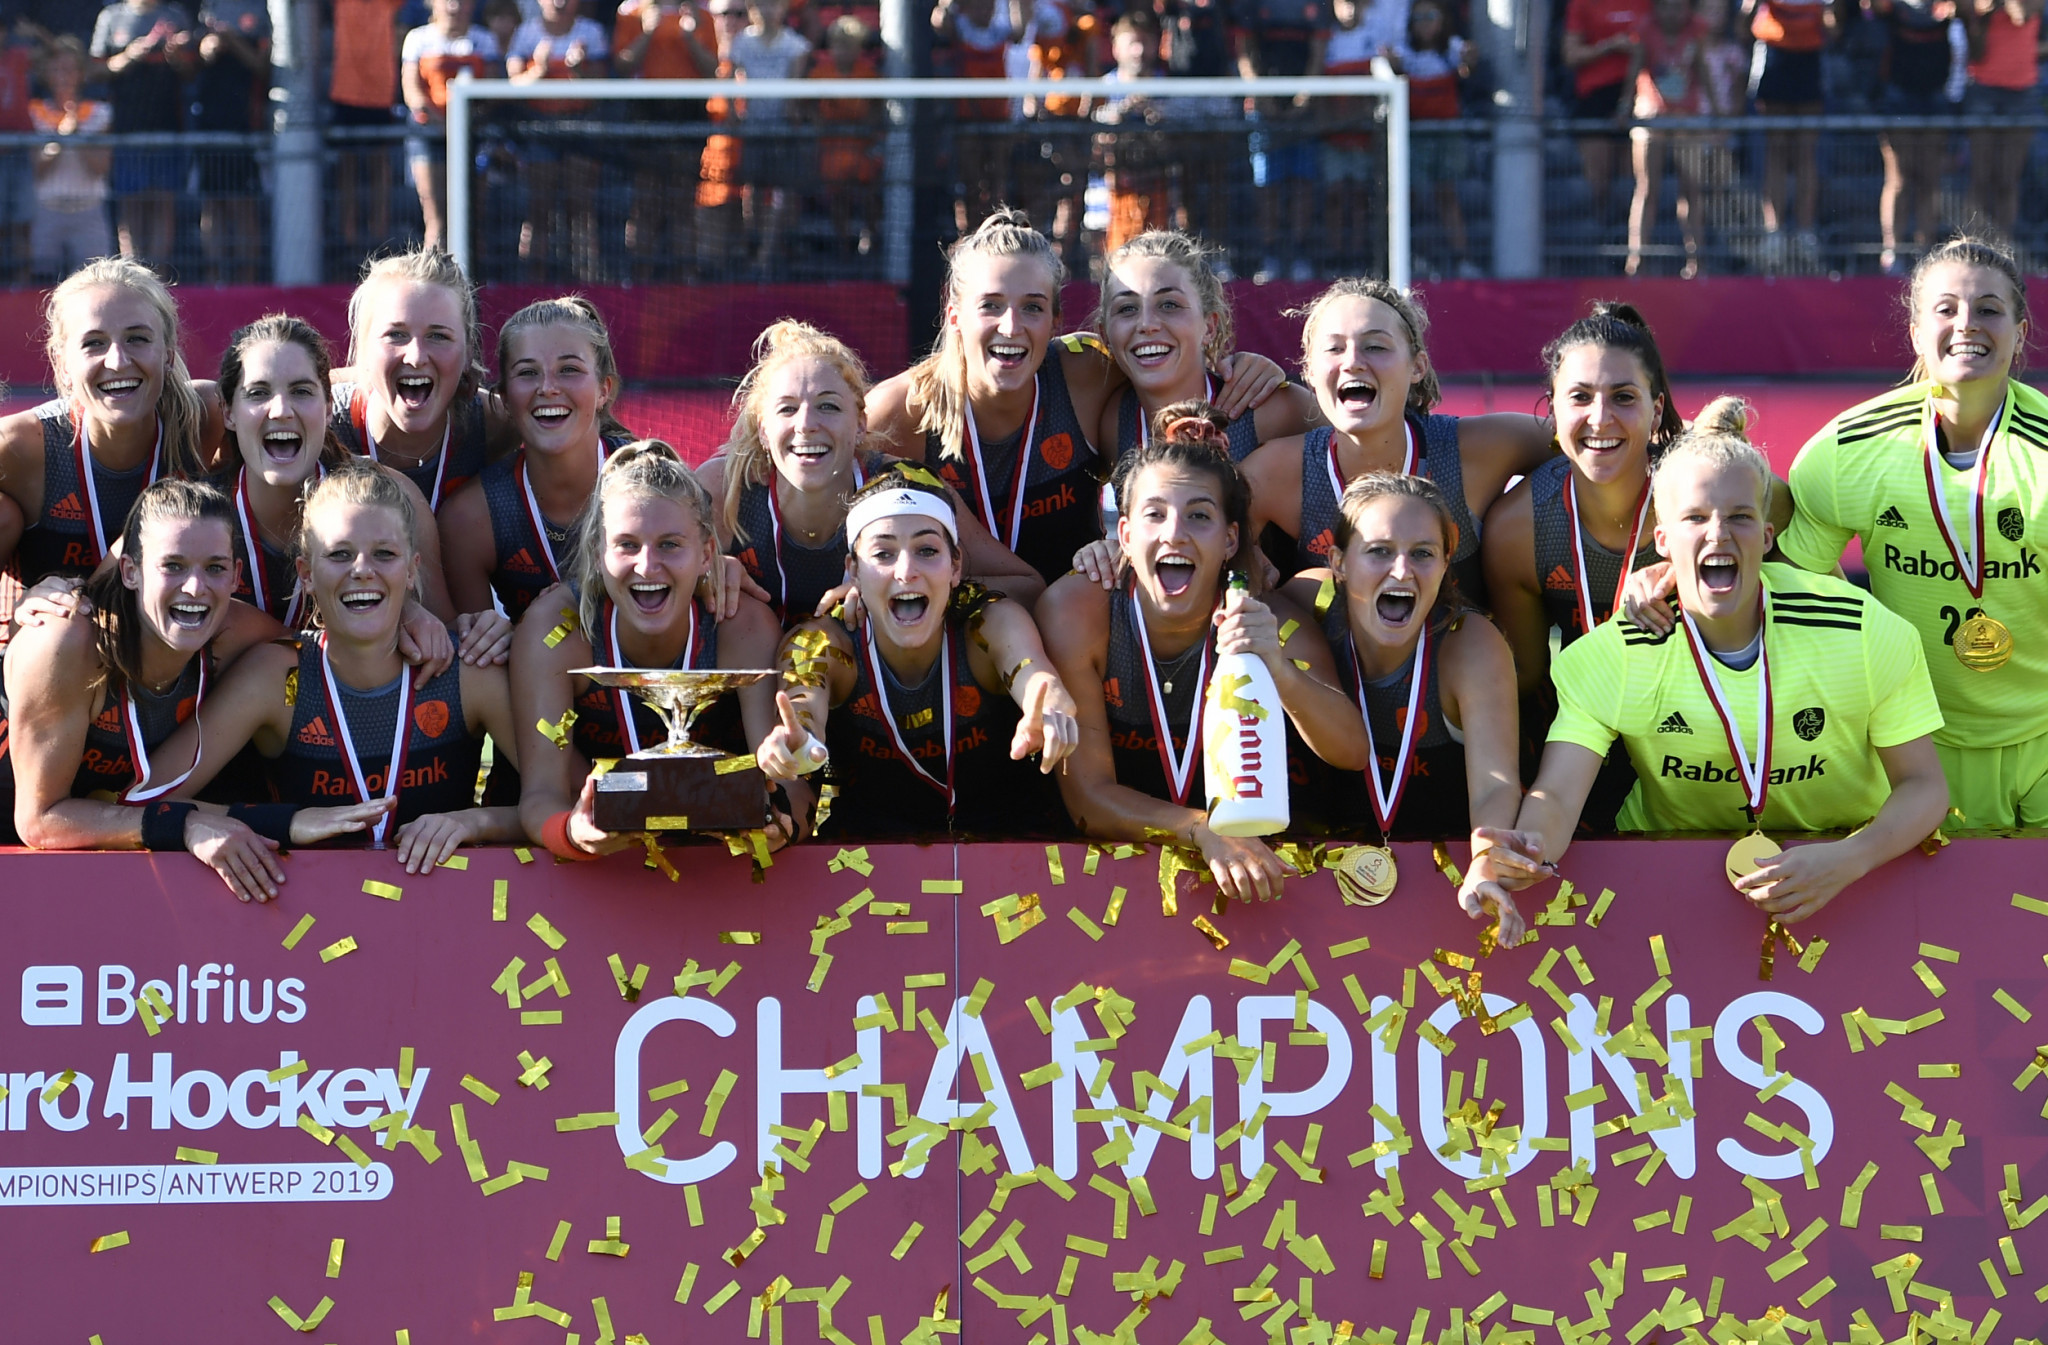 Netherlands qualify for Tokyo 2020 after Women's EuroHockey Nations Championship triumph